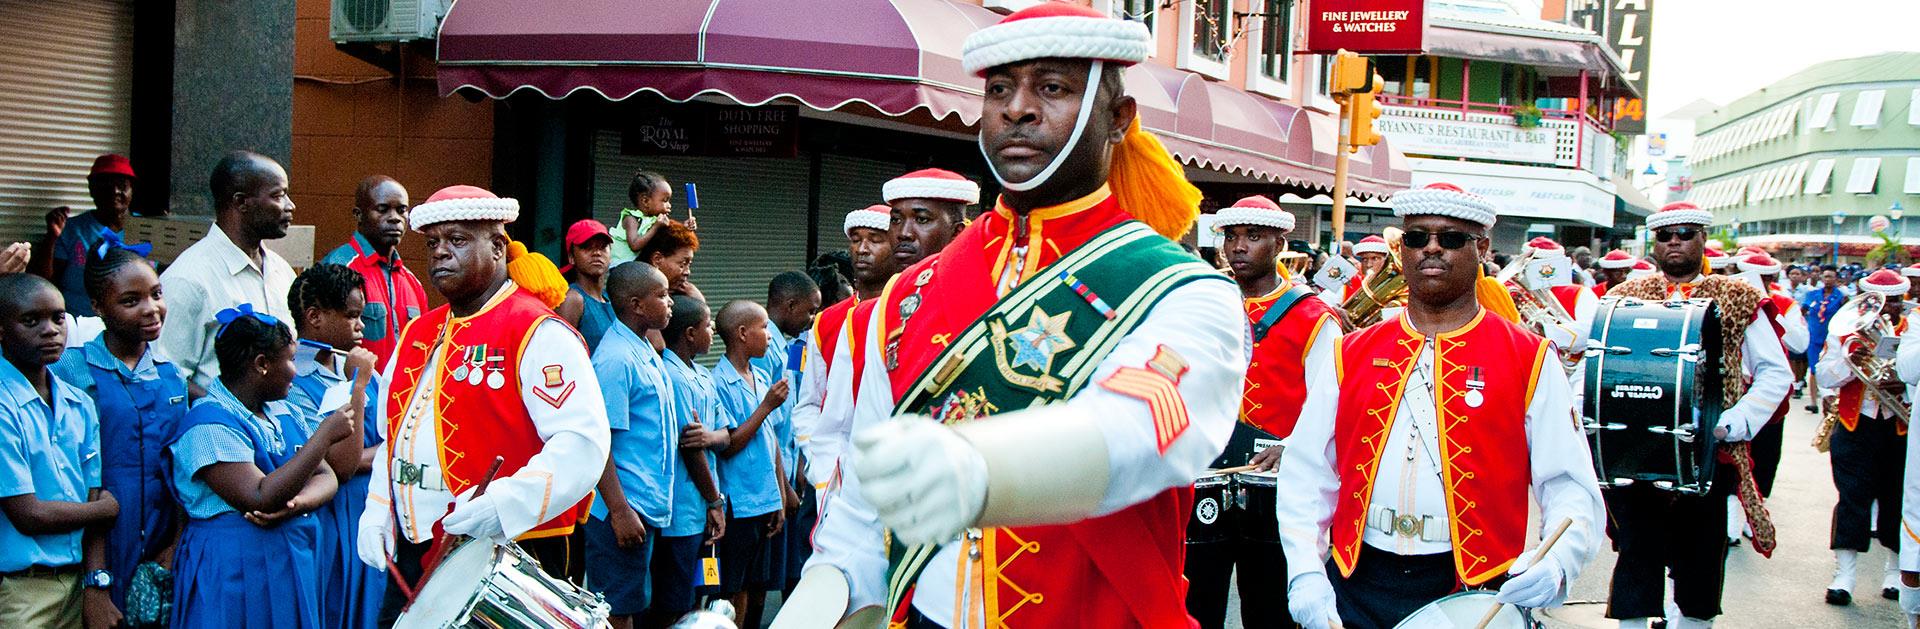 Explore The Barbados 50th Anniversary of Independence Parade and Mega